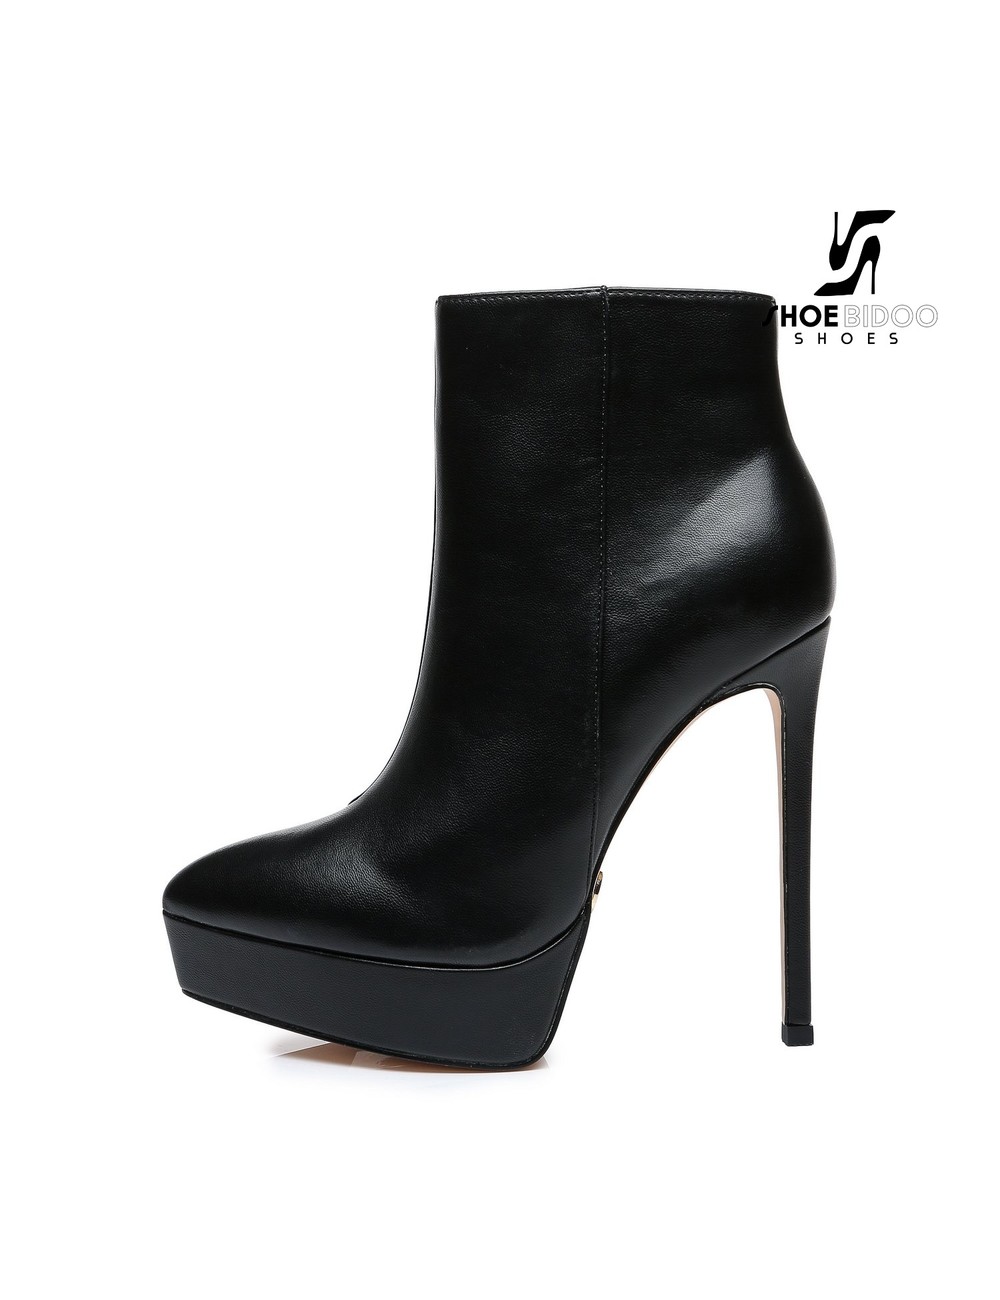 Giaro Giaro Platform ankle boots STACK in black with 14cm heels ...